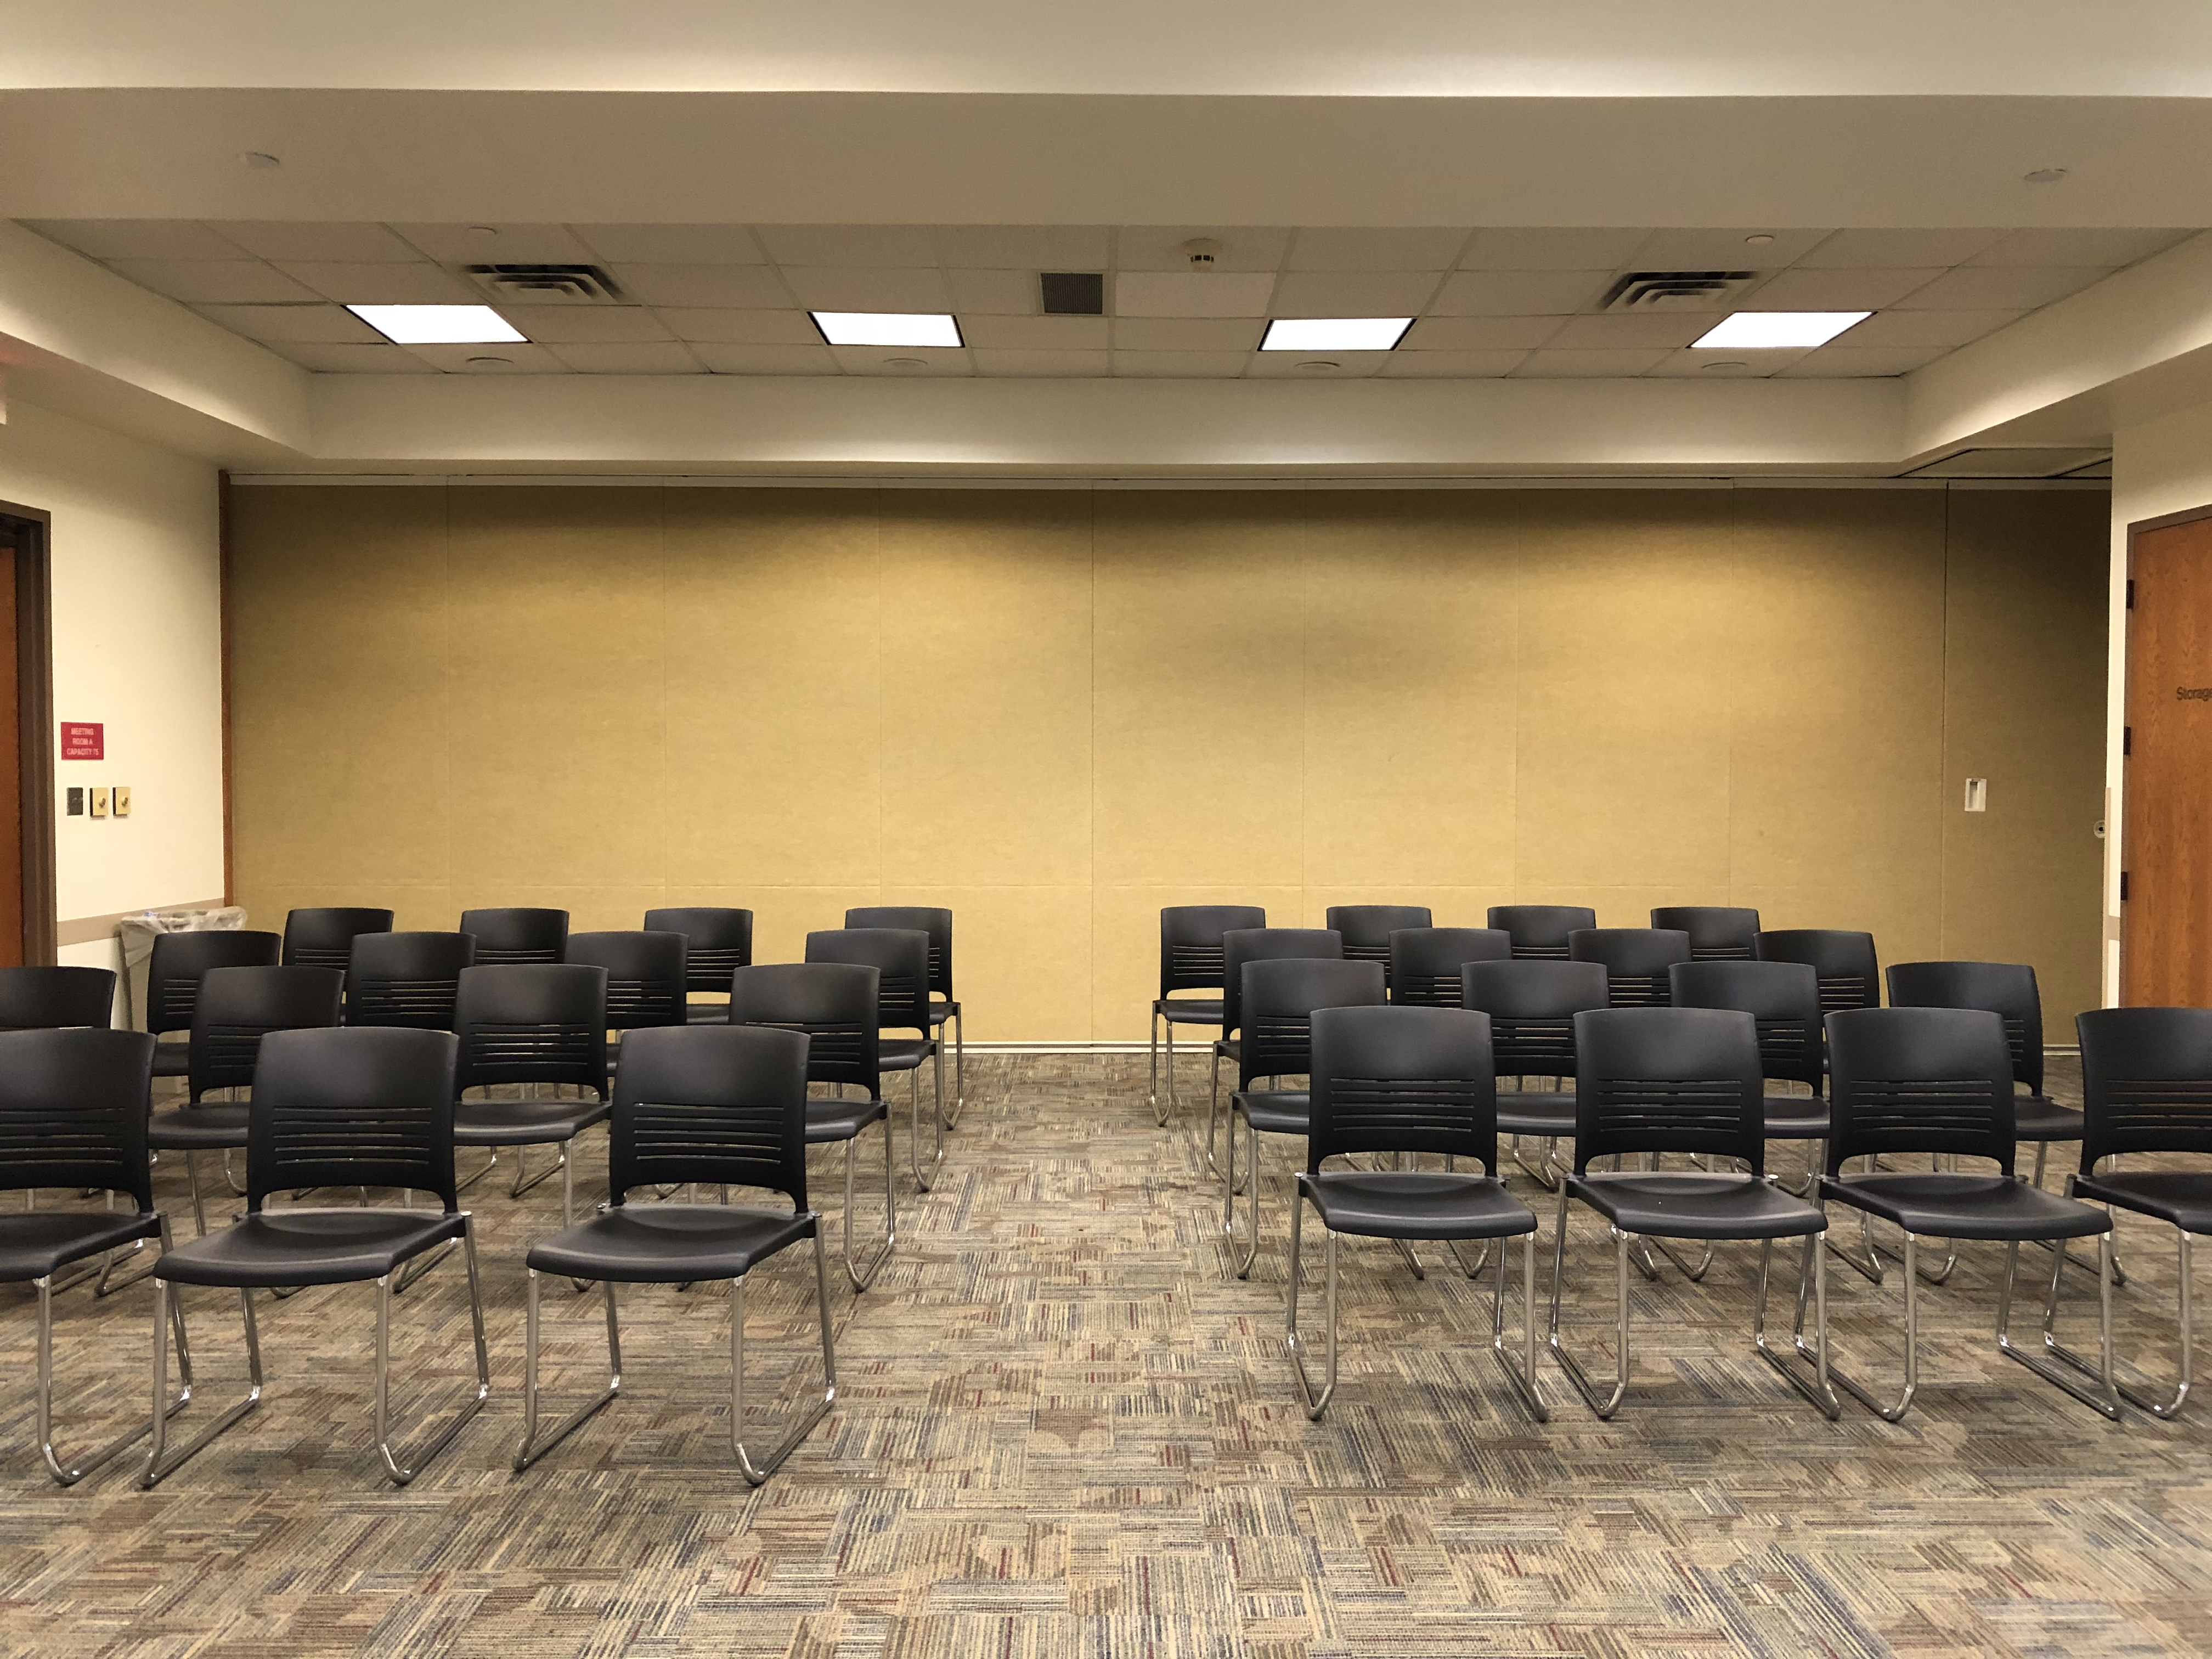 Village Meeting Room A with auditorium-style seating